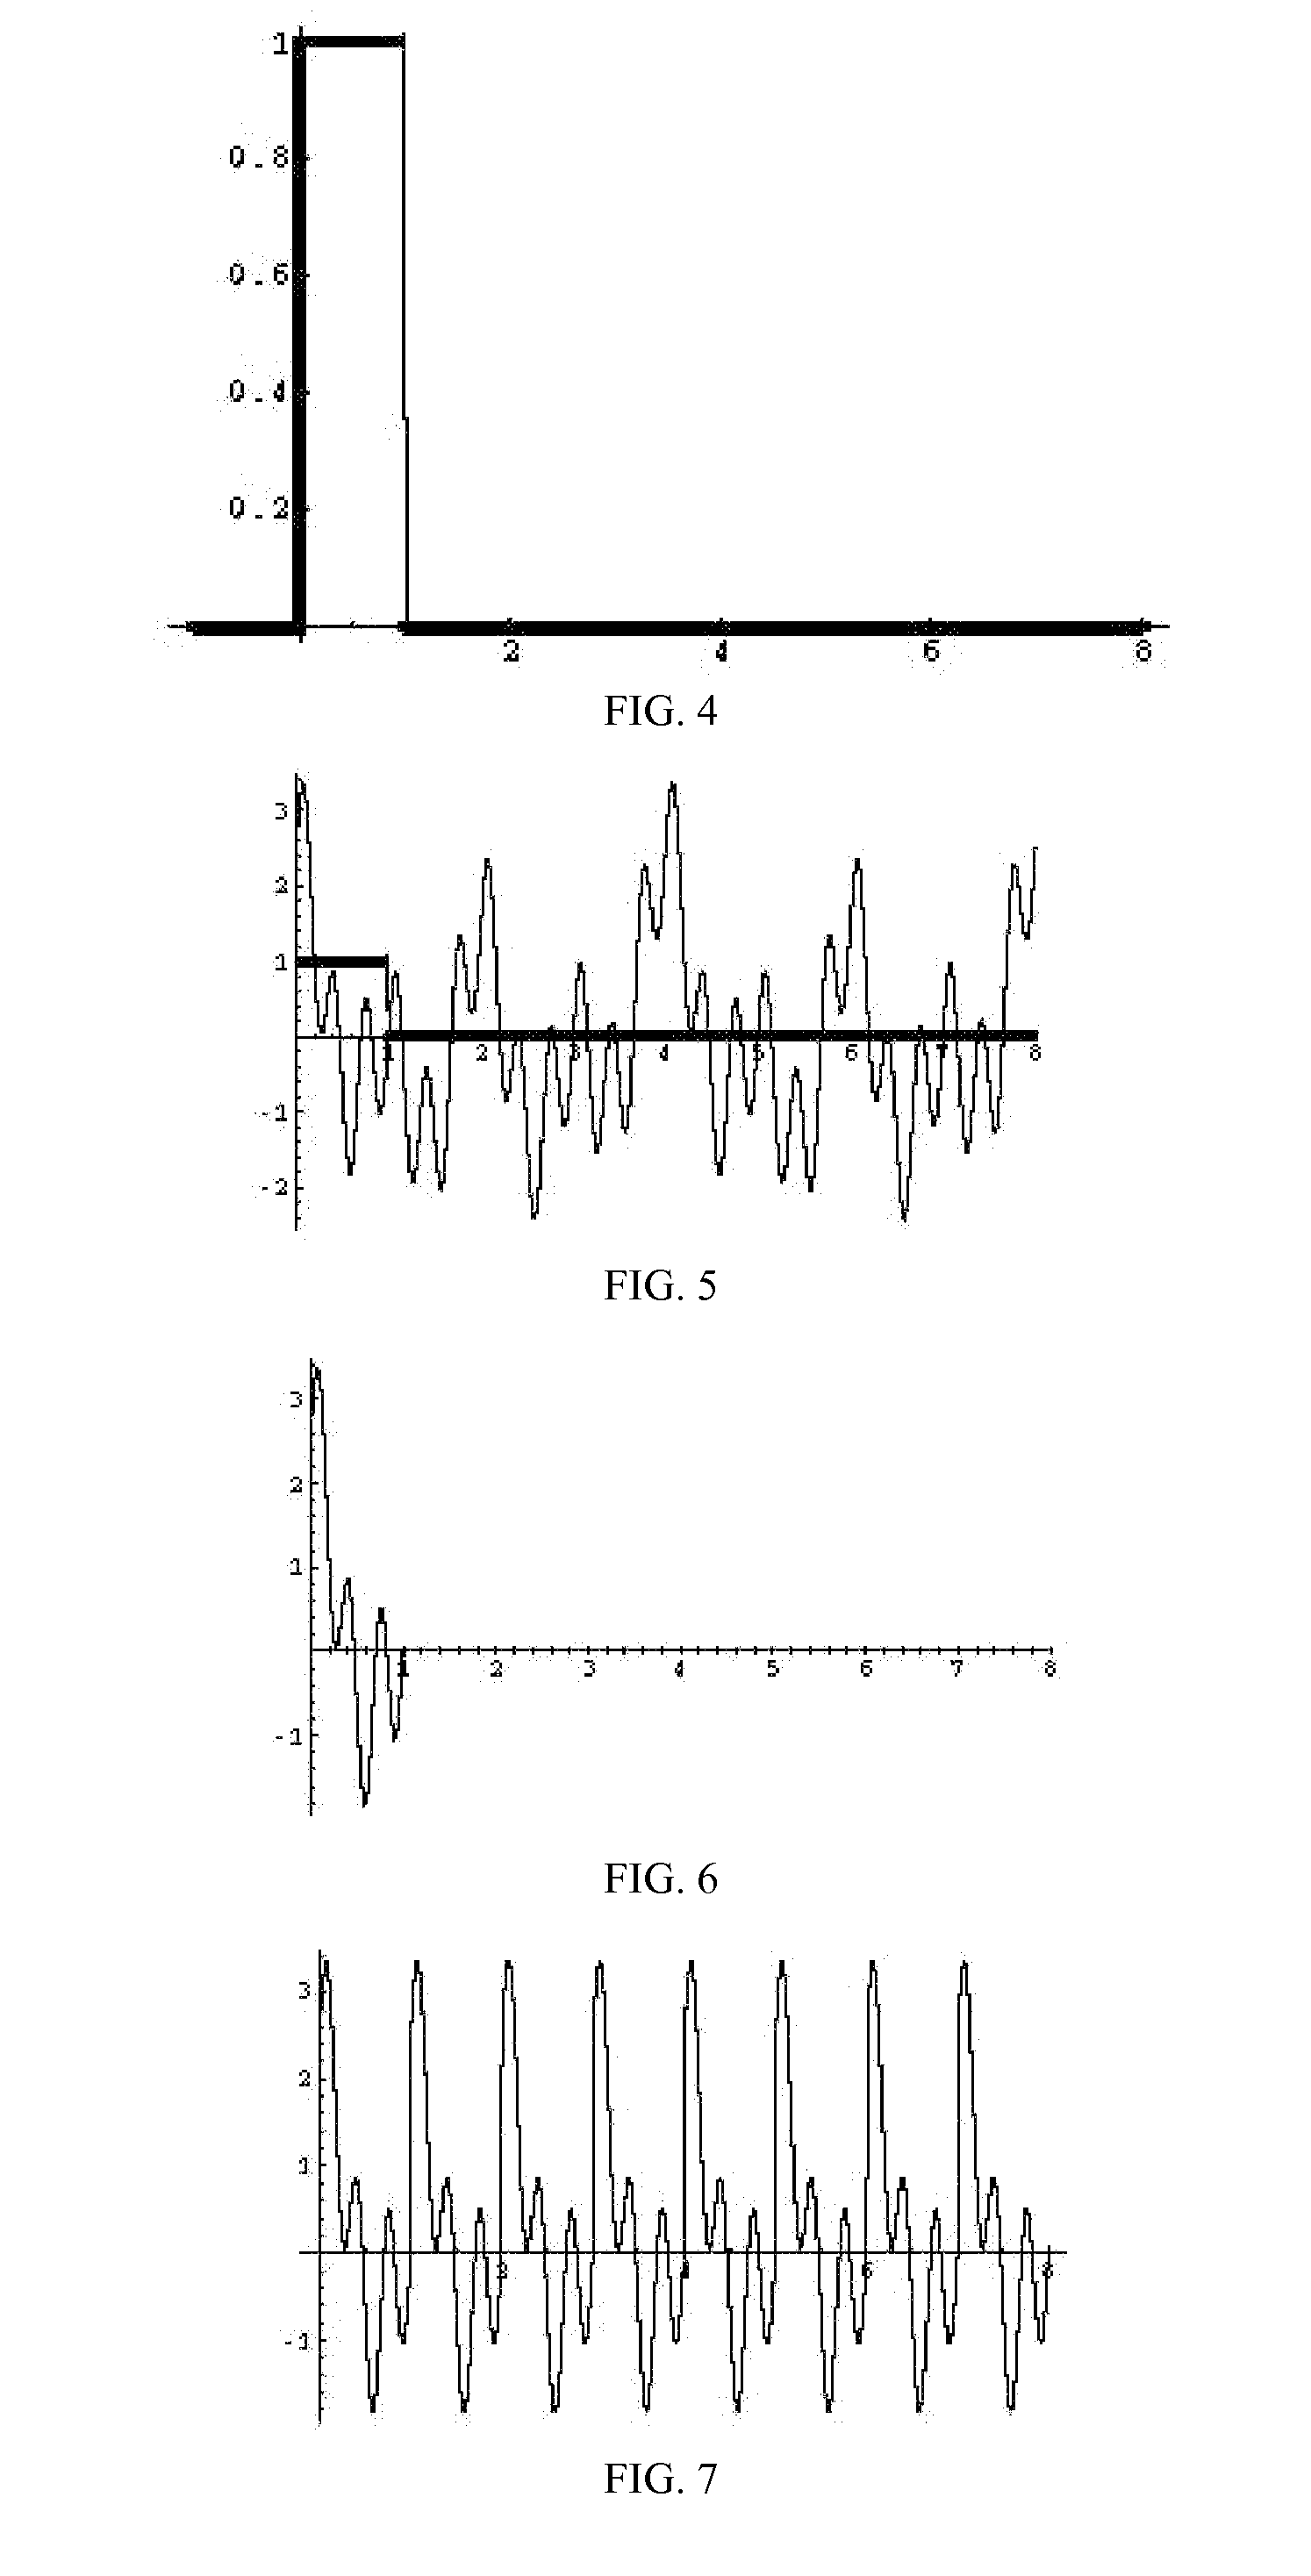 Method and Apparatus for measuring Distortion Product Otoacoustic Emissions (DPOAE) by means of frequency modulated stimuli